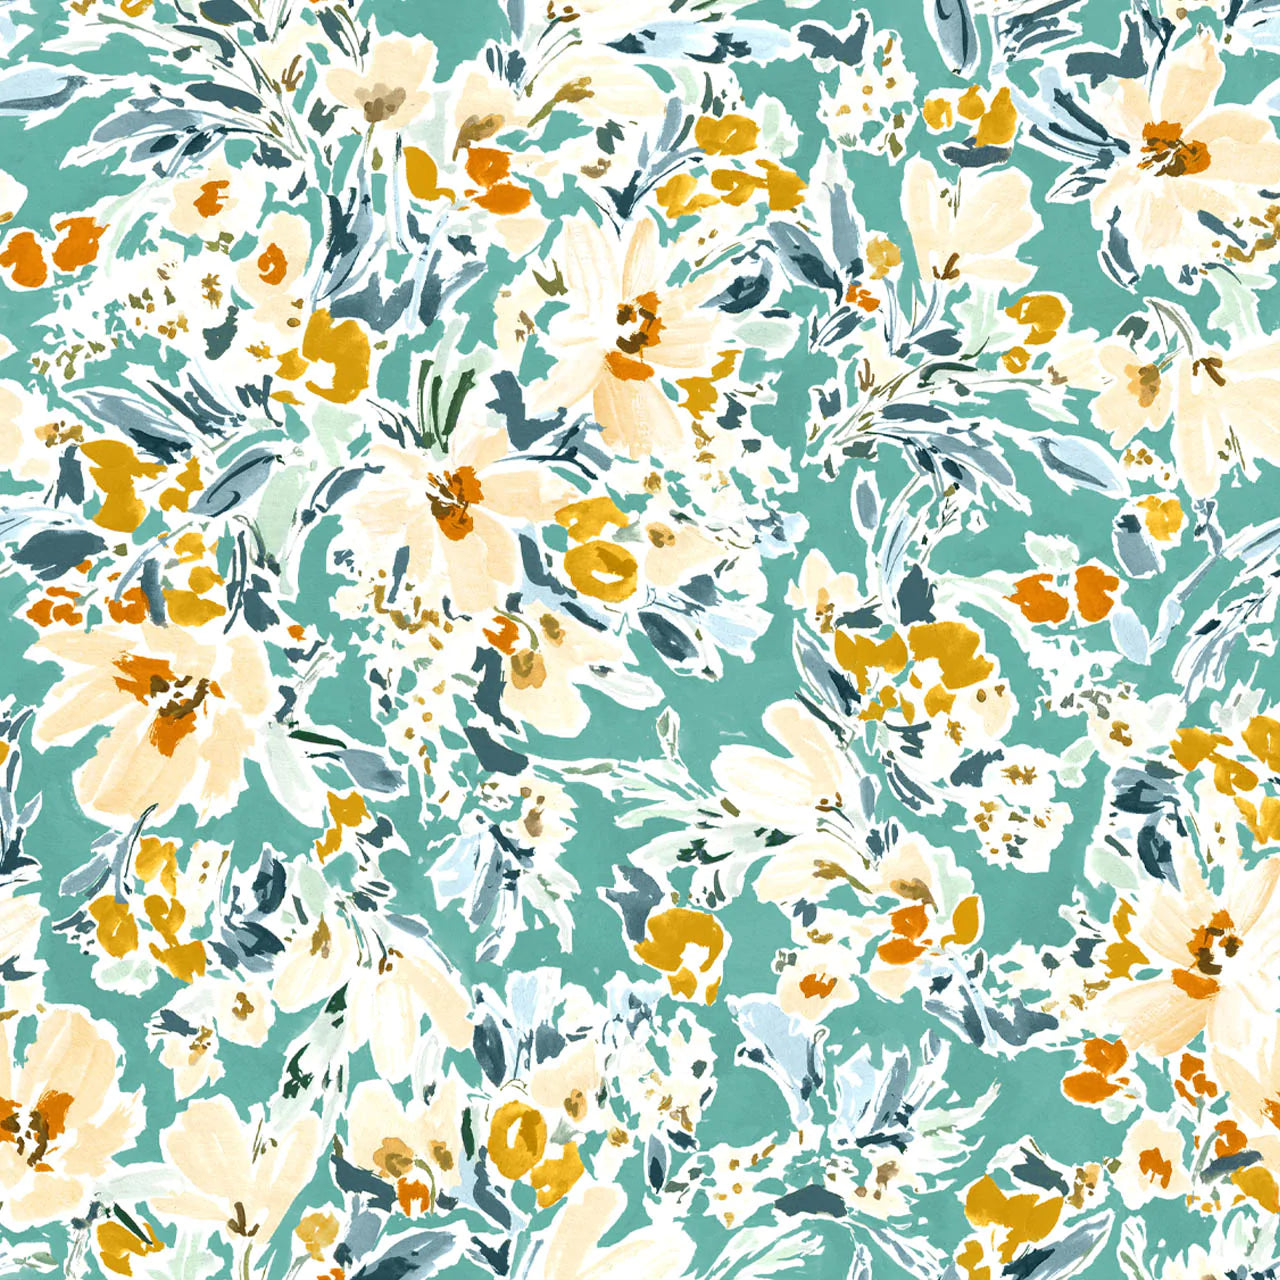 Wilderness Florals on Teal - Weave & Woven